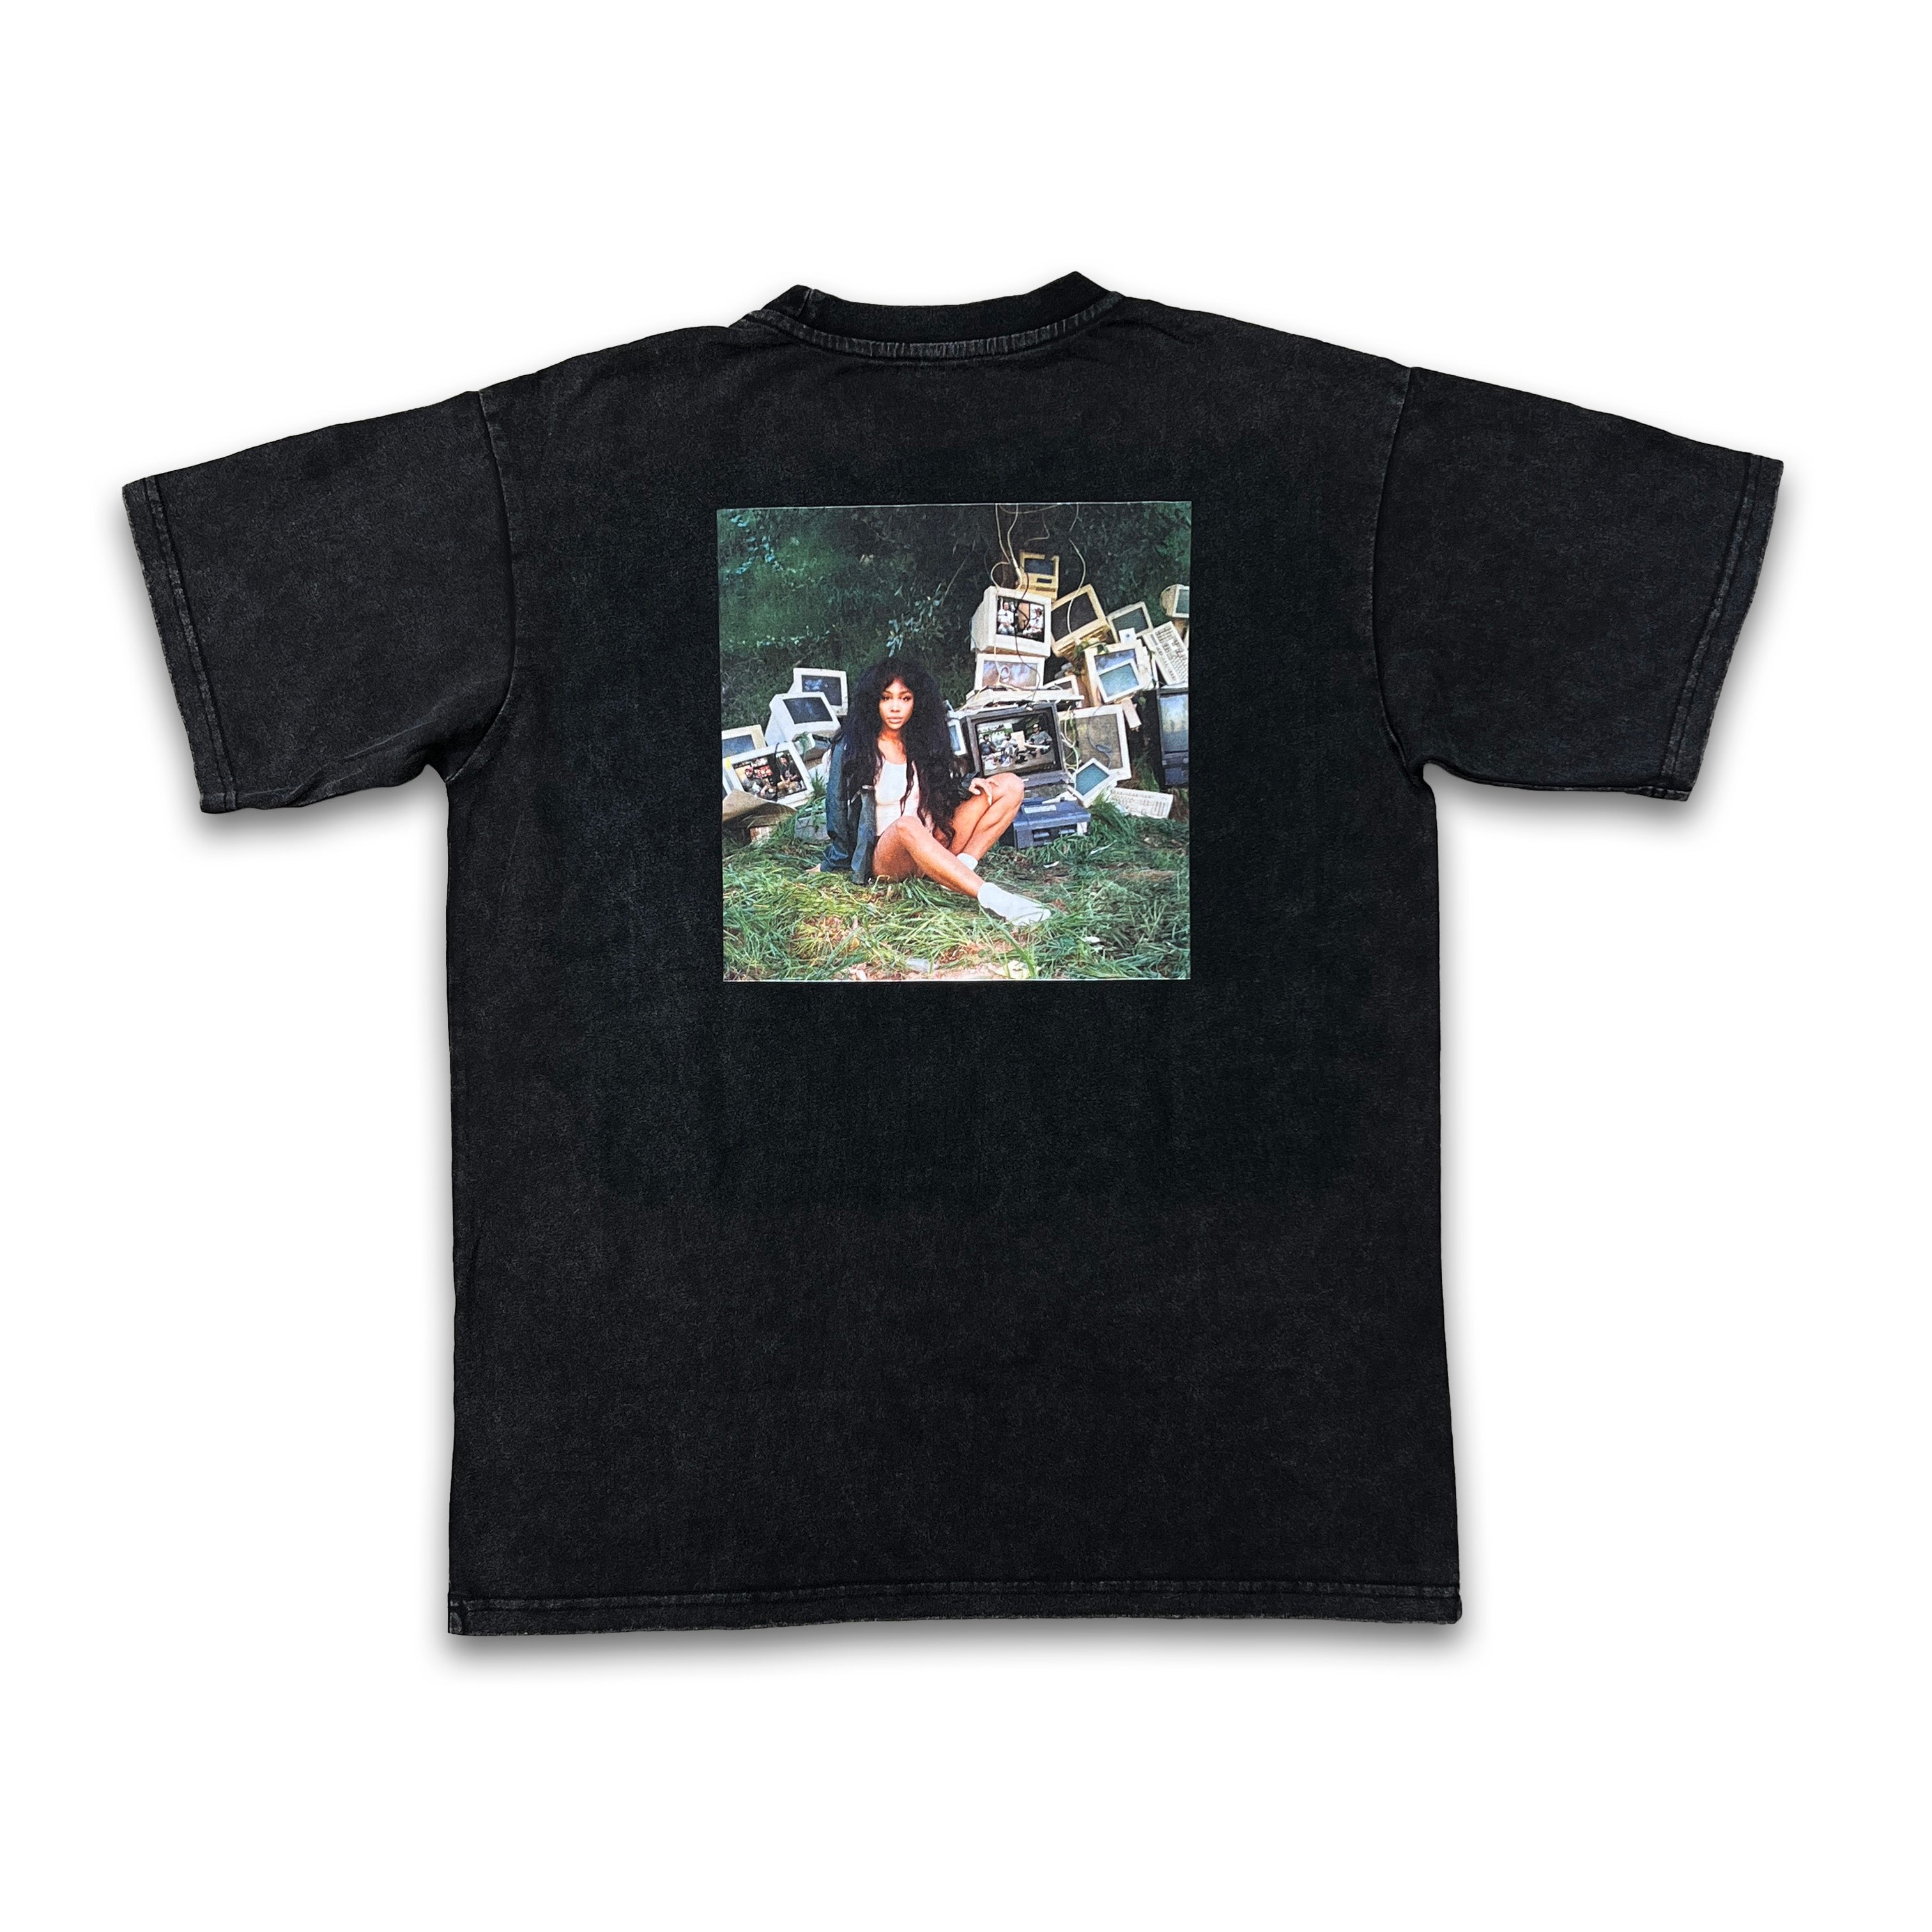 Soled Out T-Shirt "SZA" Vintage Black New Size S